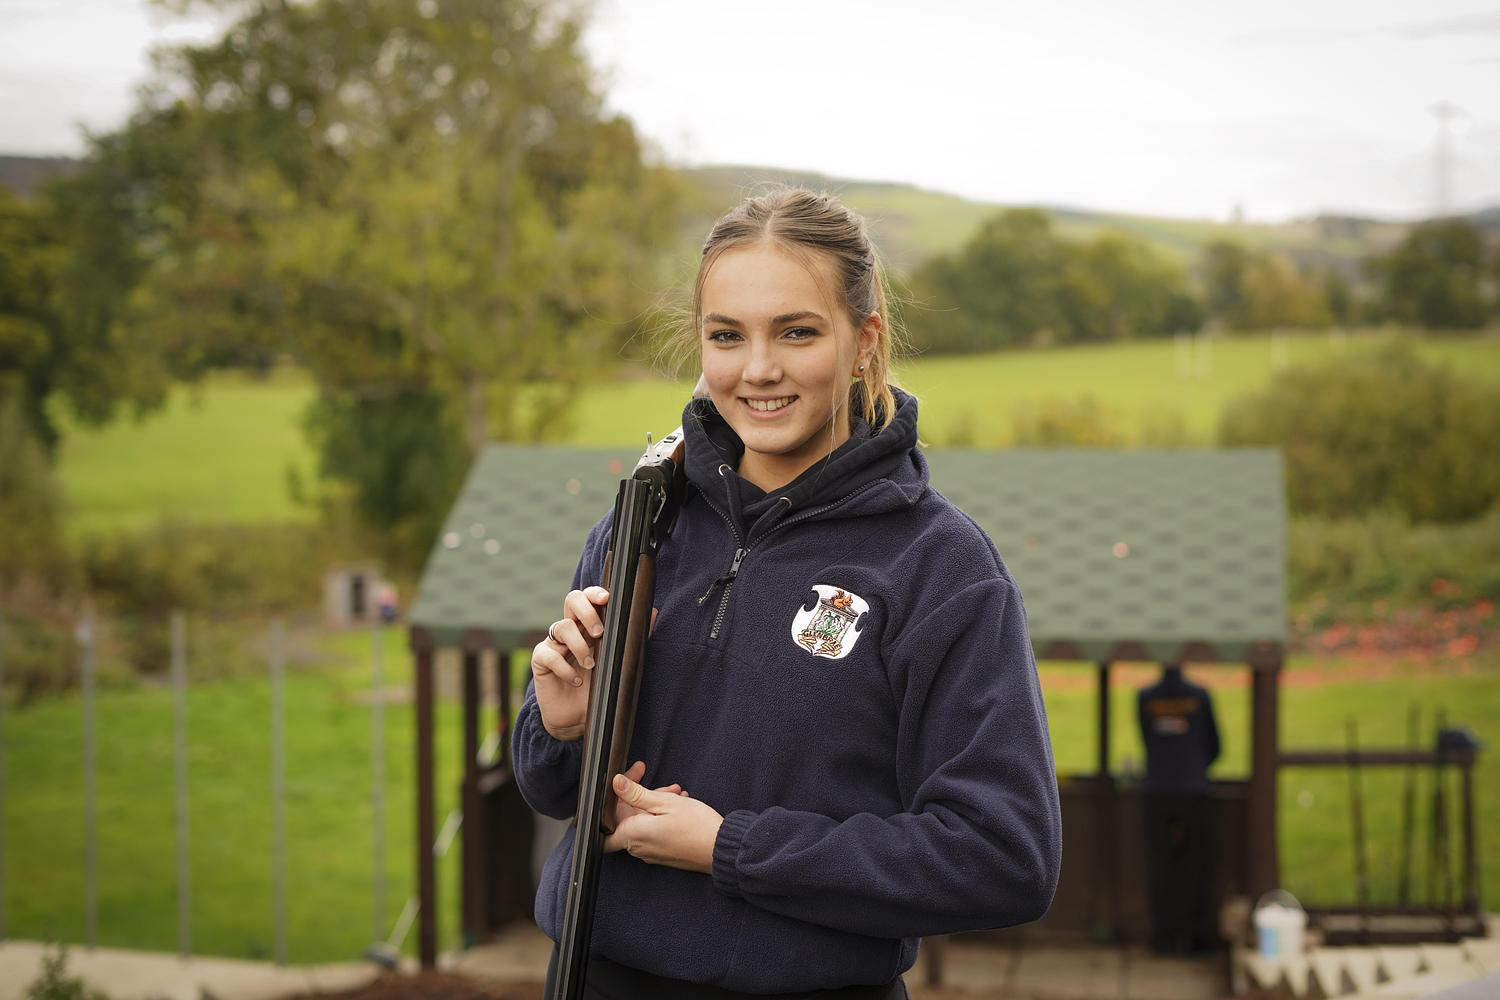 Introducing the youngest female Captain of Clays